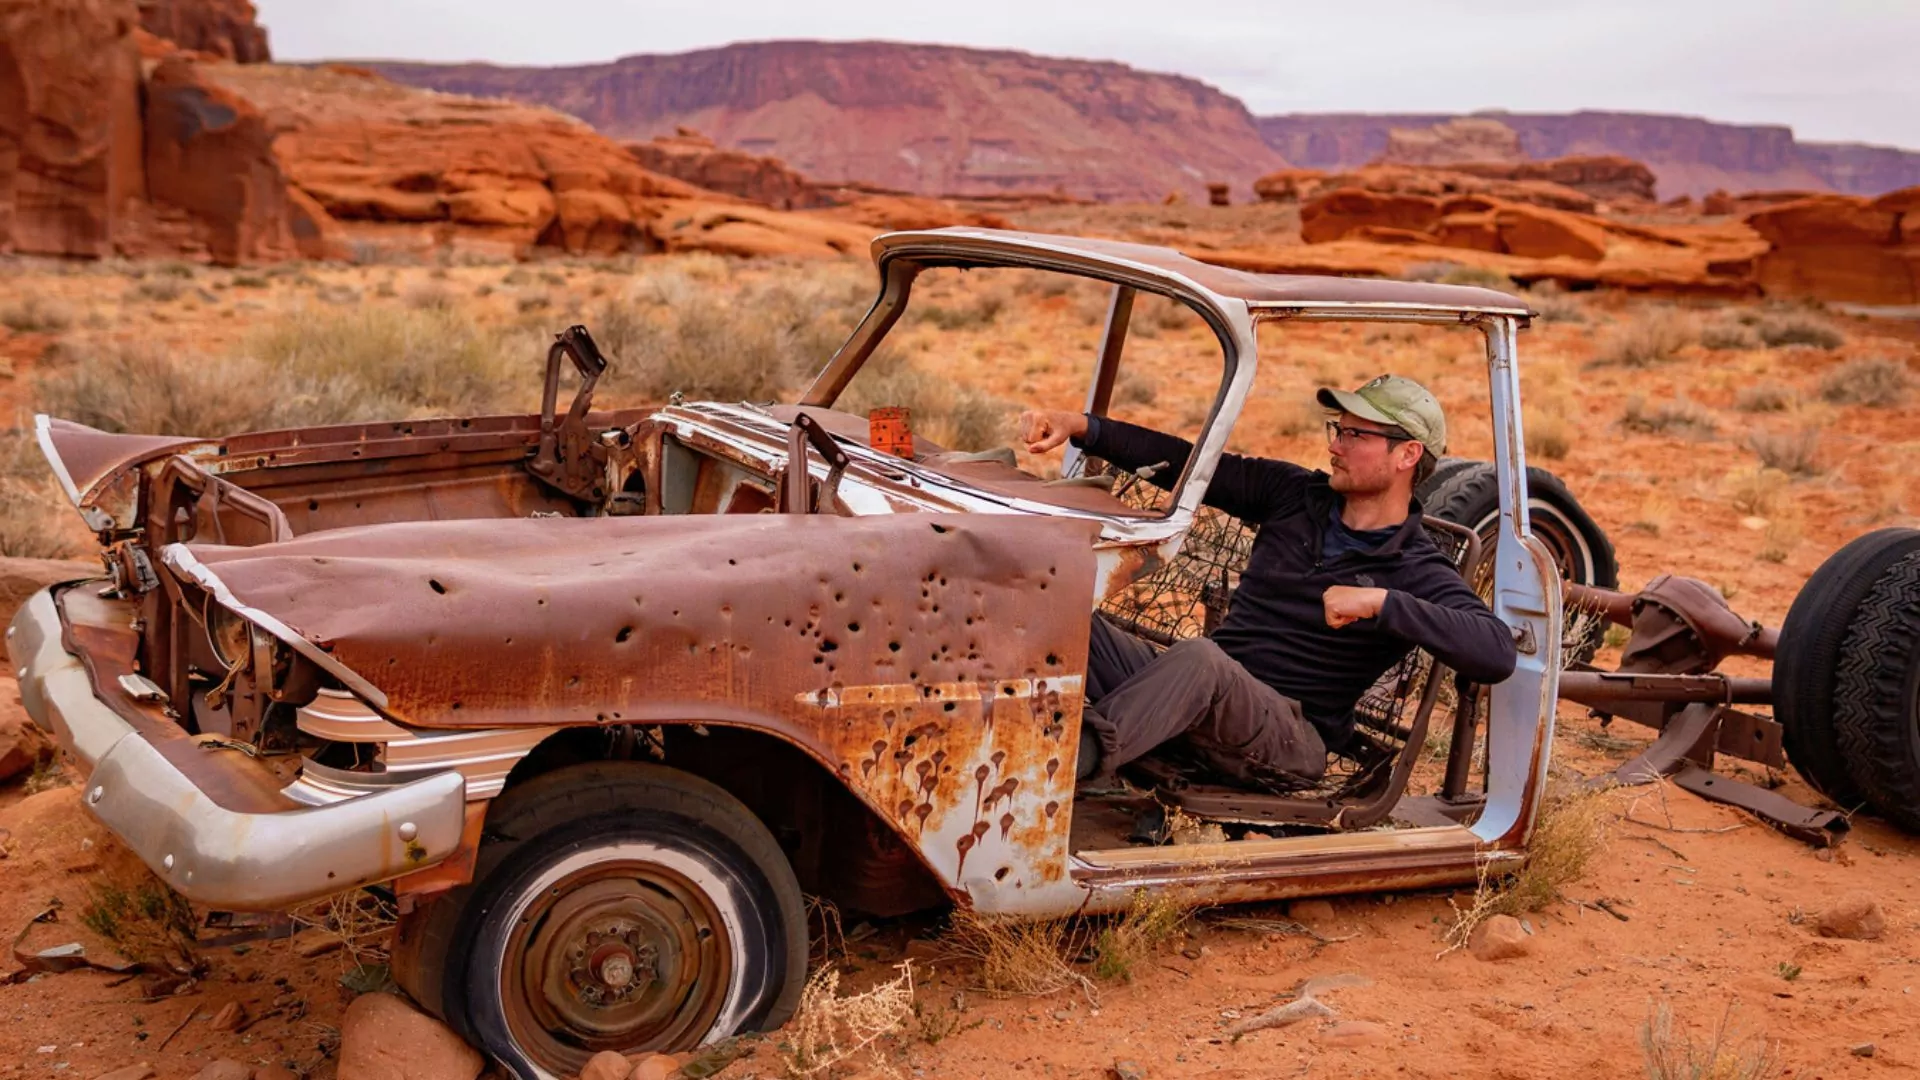 Guide and blog author Austin B. sits in an old broke down car in the desert pretending to drive